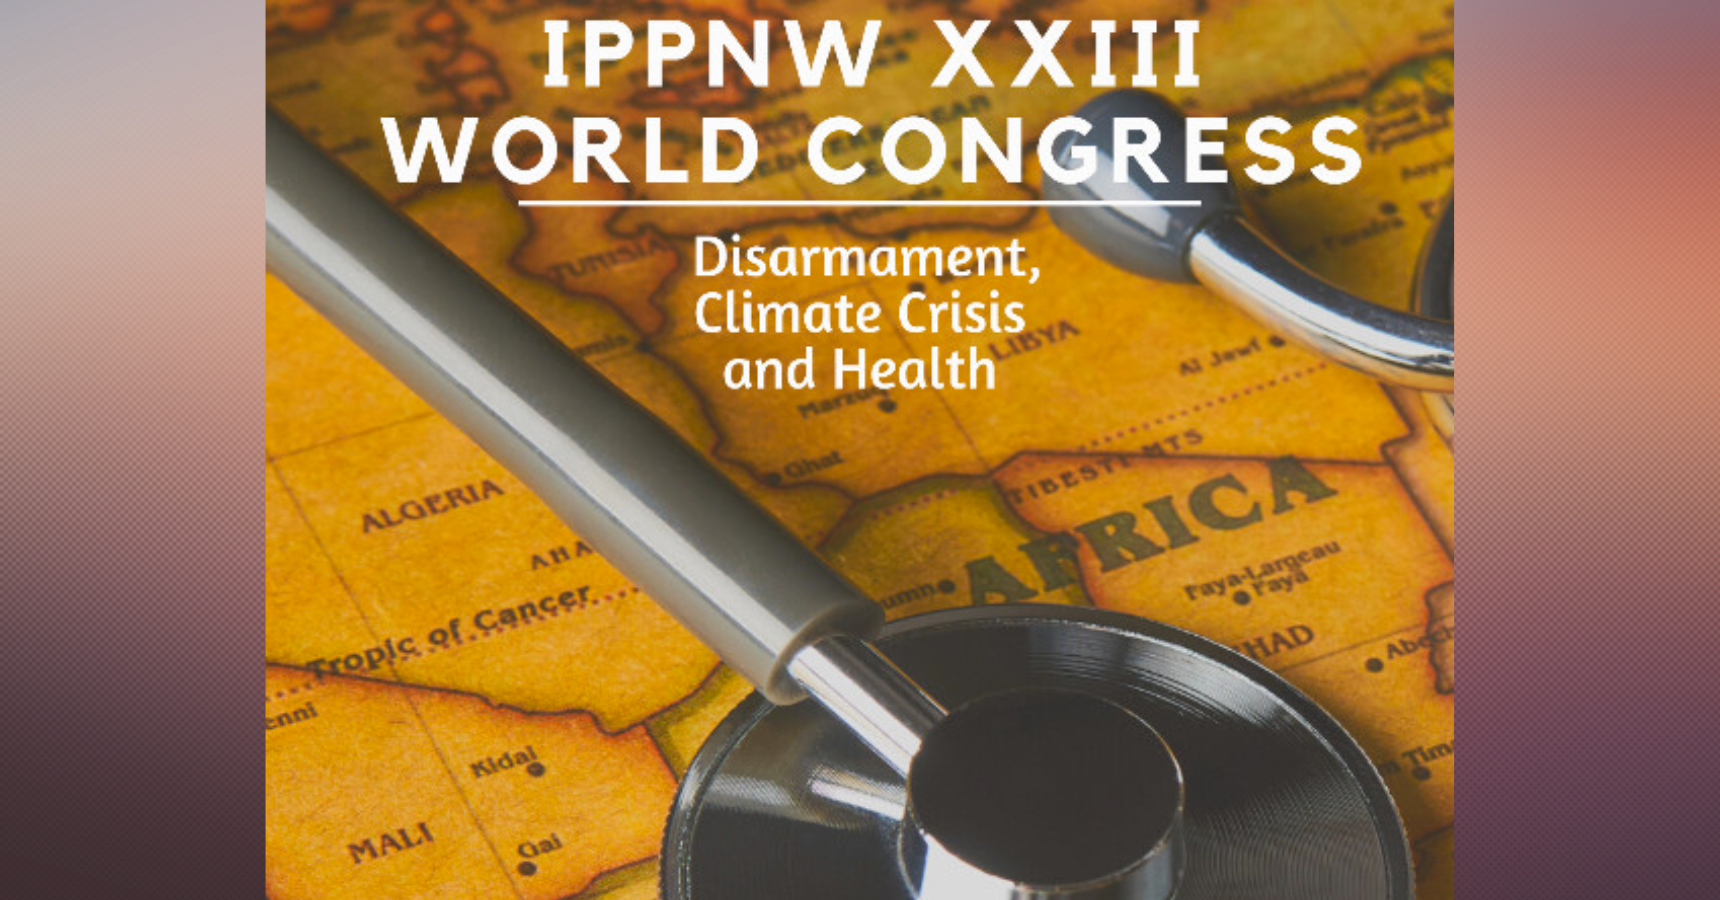 IPPNW World Congress: Disarmament, Climate crisis and Health